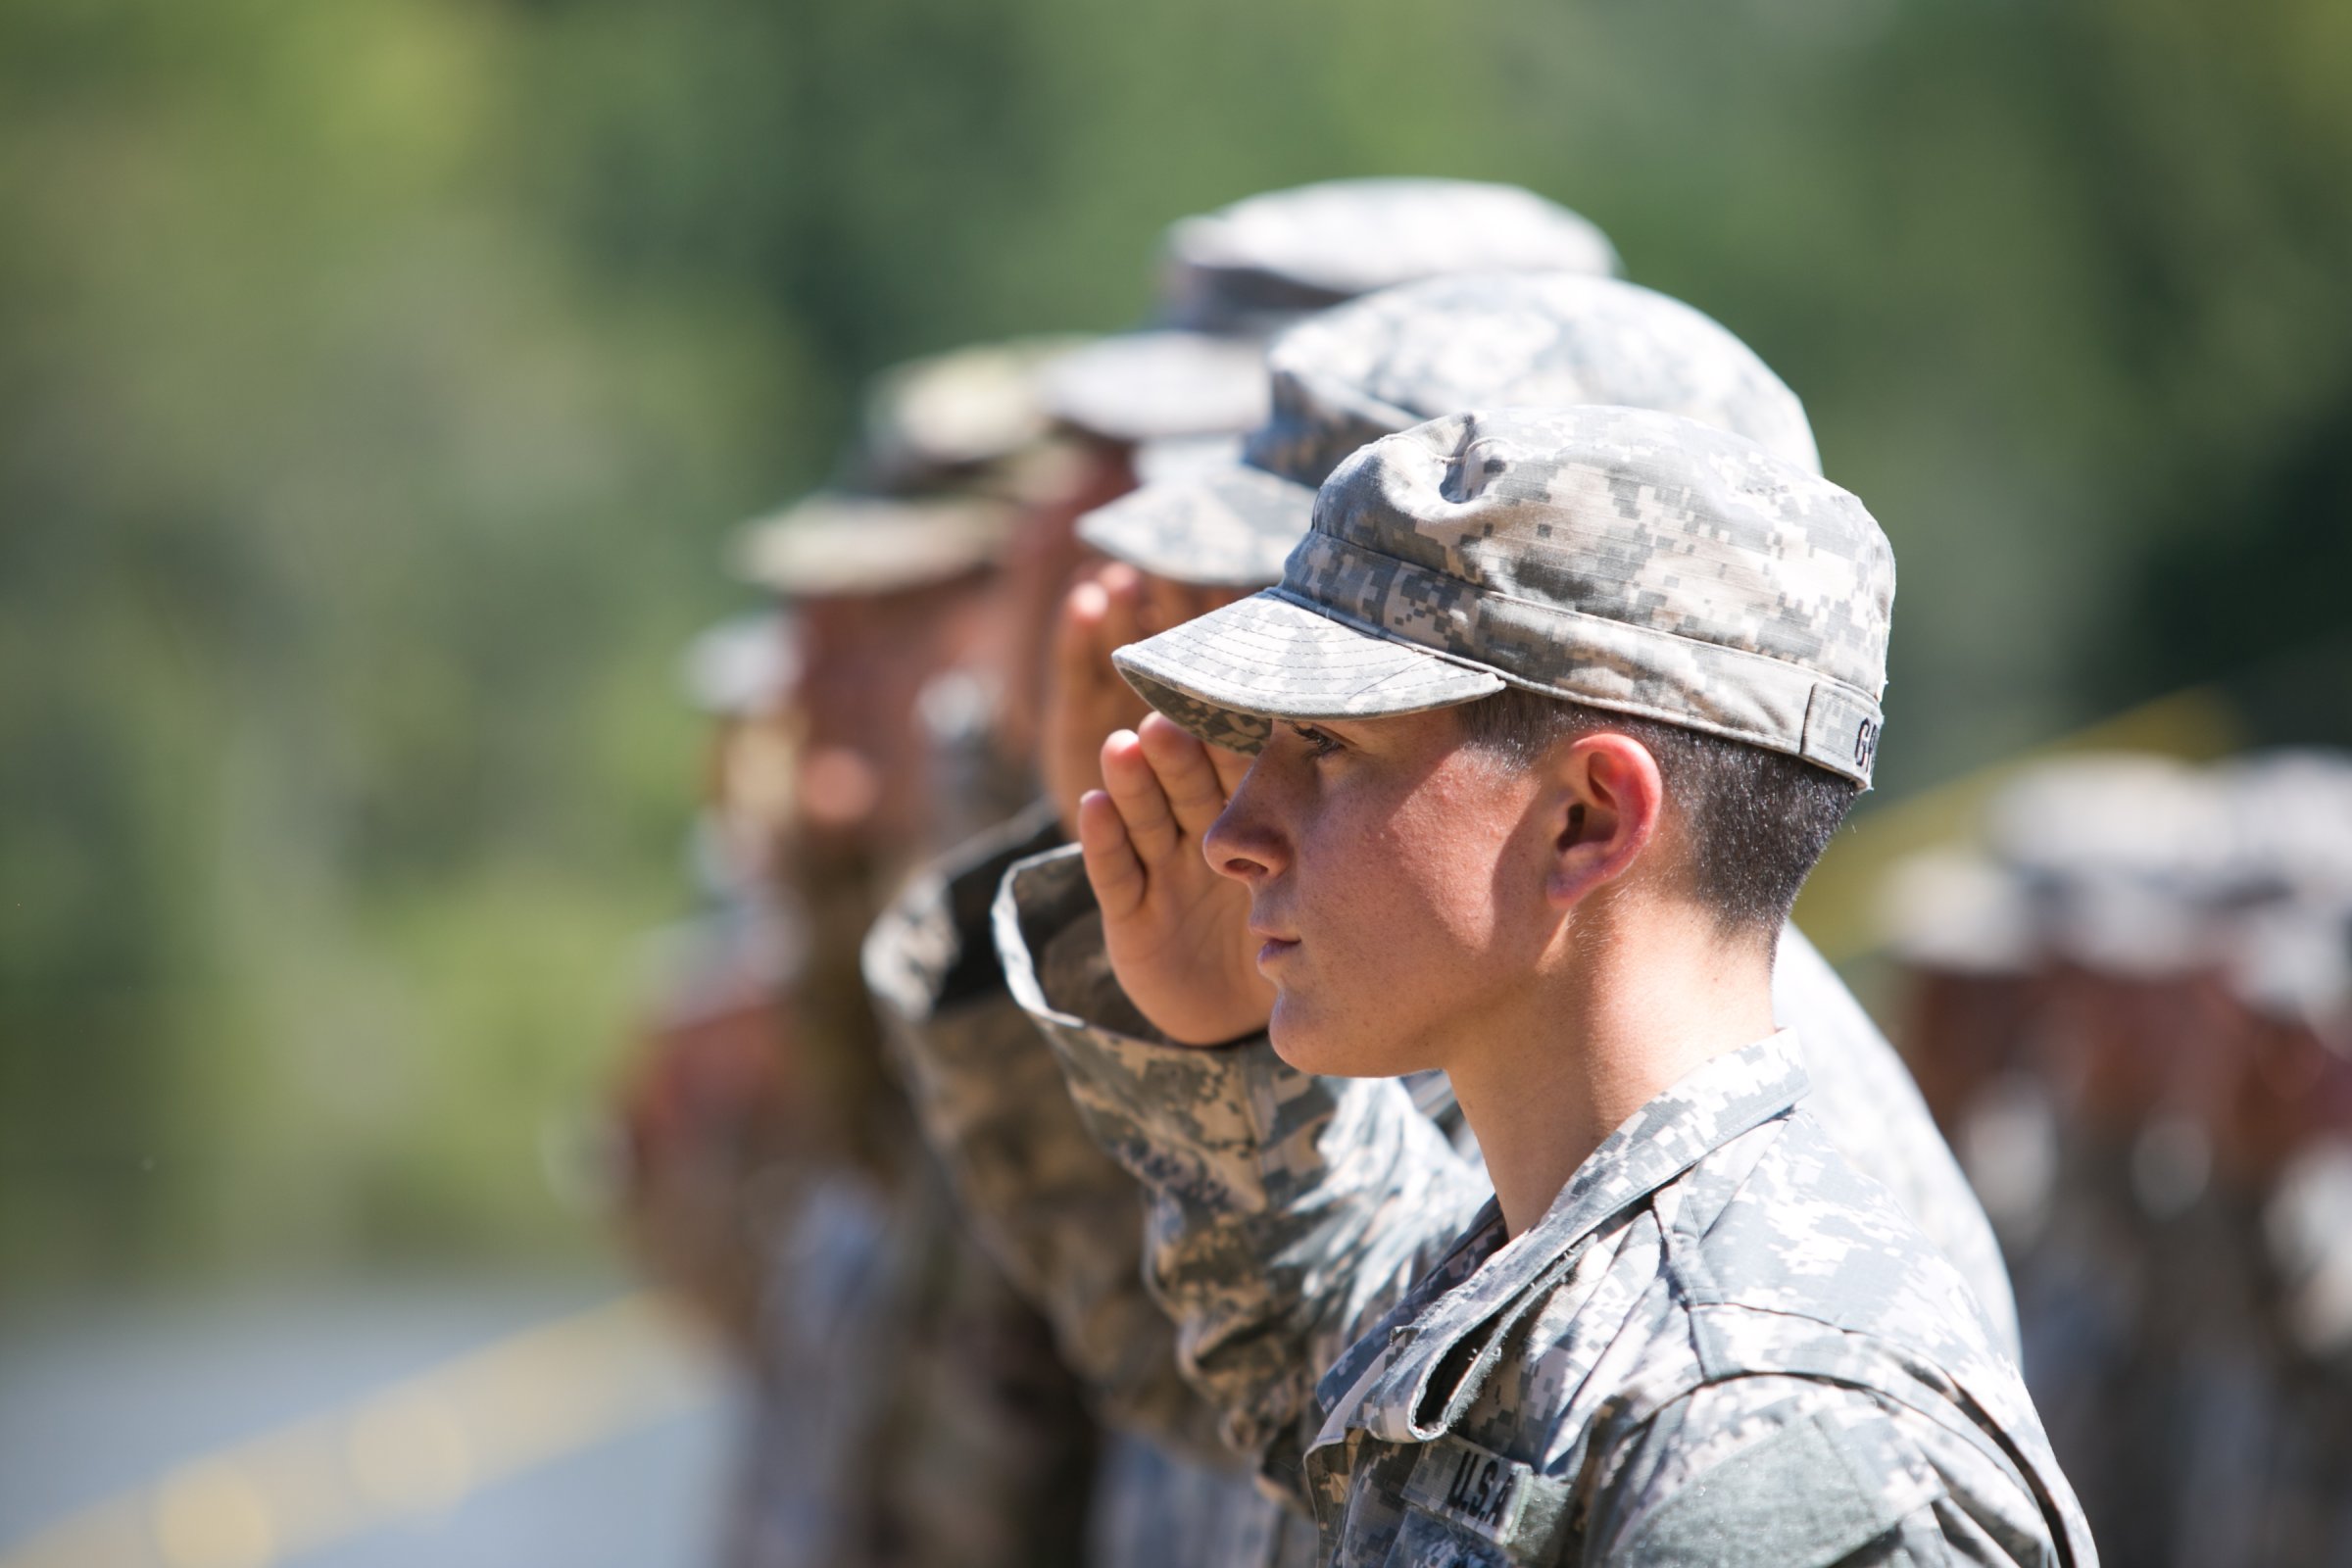 Capt. Kristen Griest salutes during the graduation ceremony of the United States Army's Ranger School on Aug. 21, 2015 at Fort Benning, Georgia . Capt. Griest and 1st Lt. Shaye Haver are the first women ever to successfully complete the U.S. Army's Ranger School.